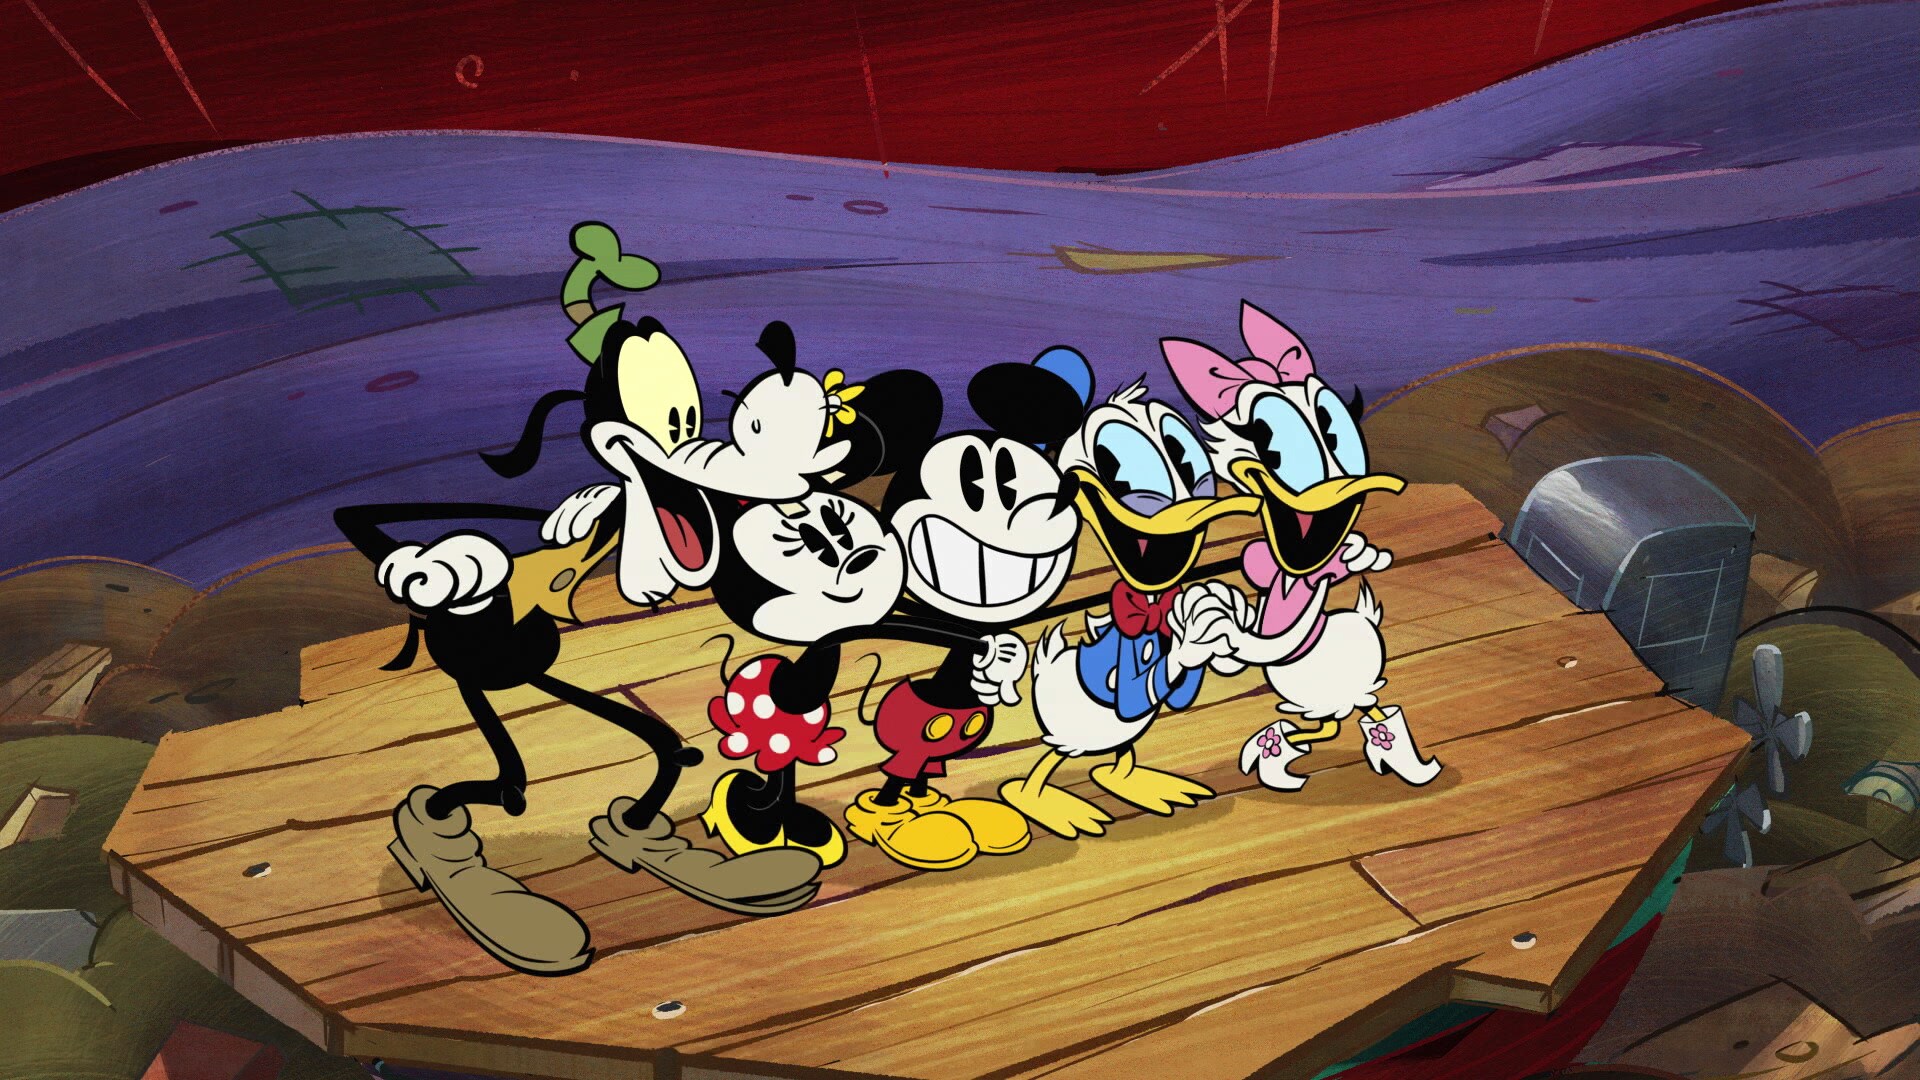 The Wonderful Summer of Mickey Mouse" finds Mickey Mouse and his friends each recalling the wild events leading up to the Annual Summer Fireworks Spectacular from their point-of-view. Coming to Disney+ July 8